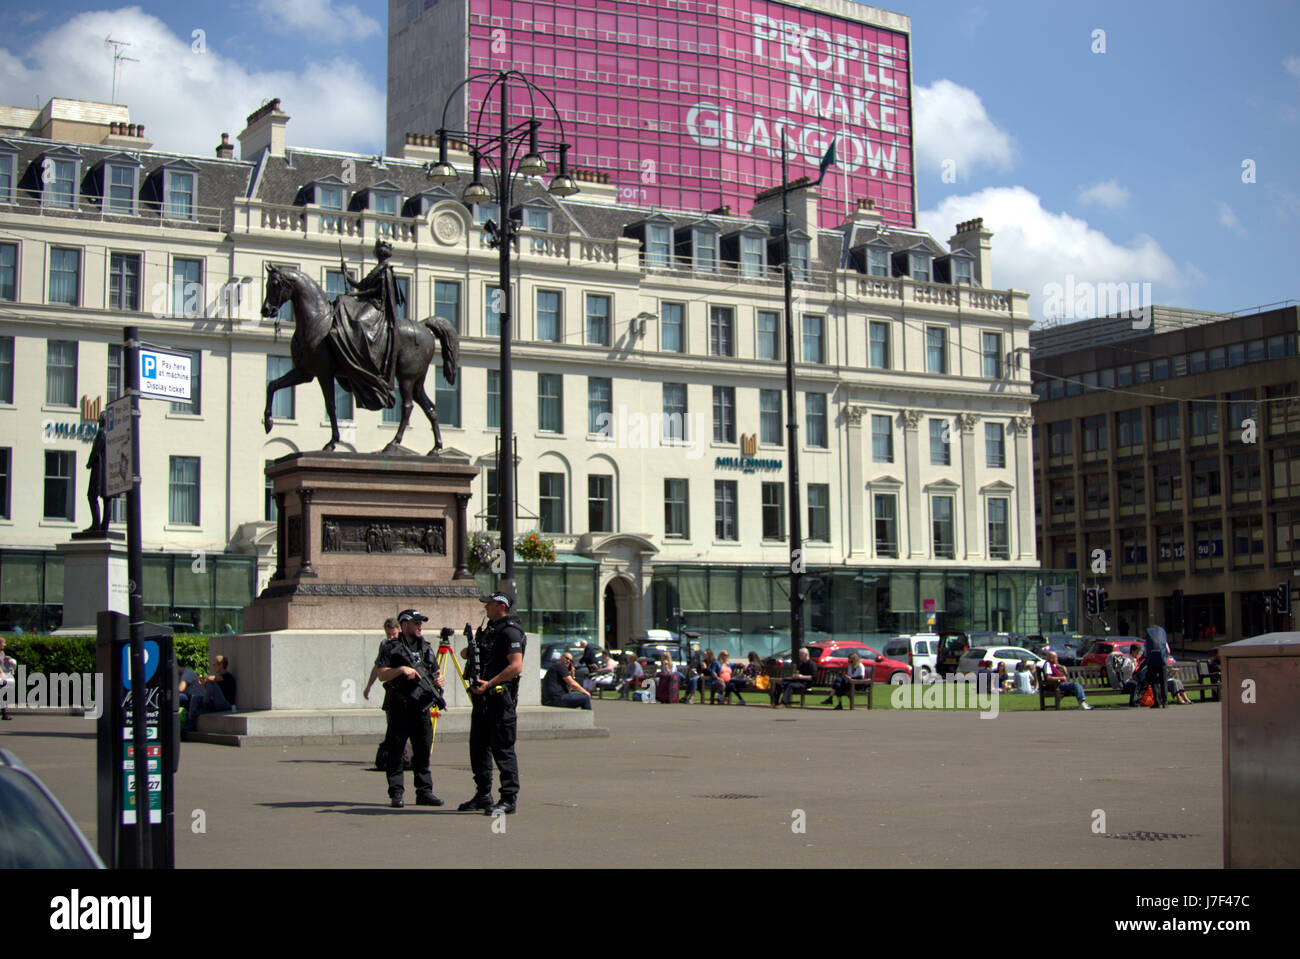 Glasgow, Scotland, UK. 25th May, 2017. Armed police patrol the centre of Glasgow as the sun shines Credit: gerard ferry/Alamy Live News Stock Photo